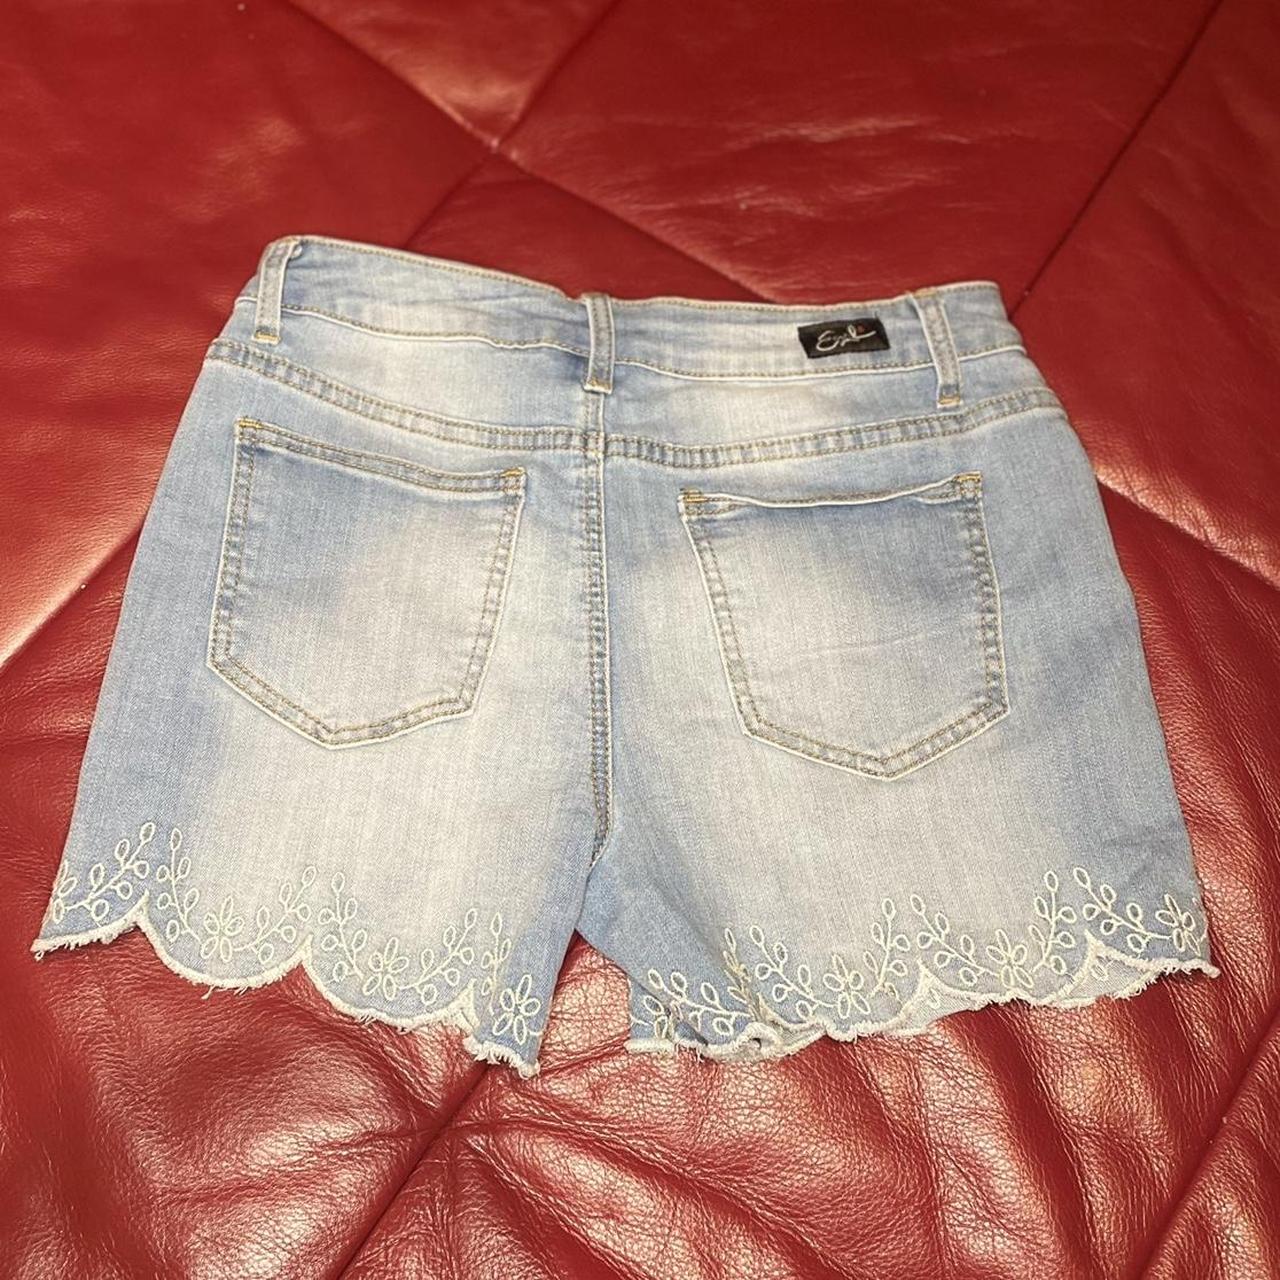 Product Image 4 - High rise jean shorts 💙❤️🌟
.
Size